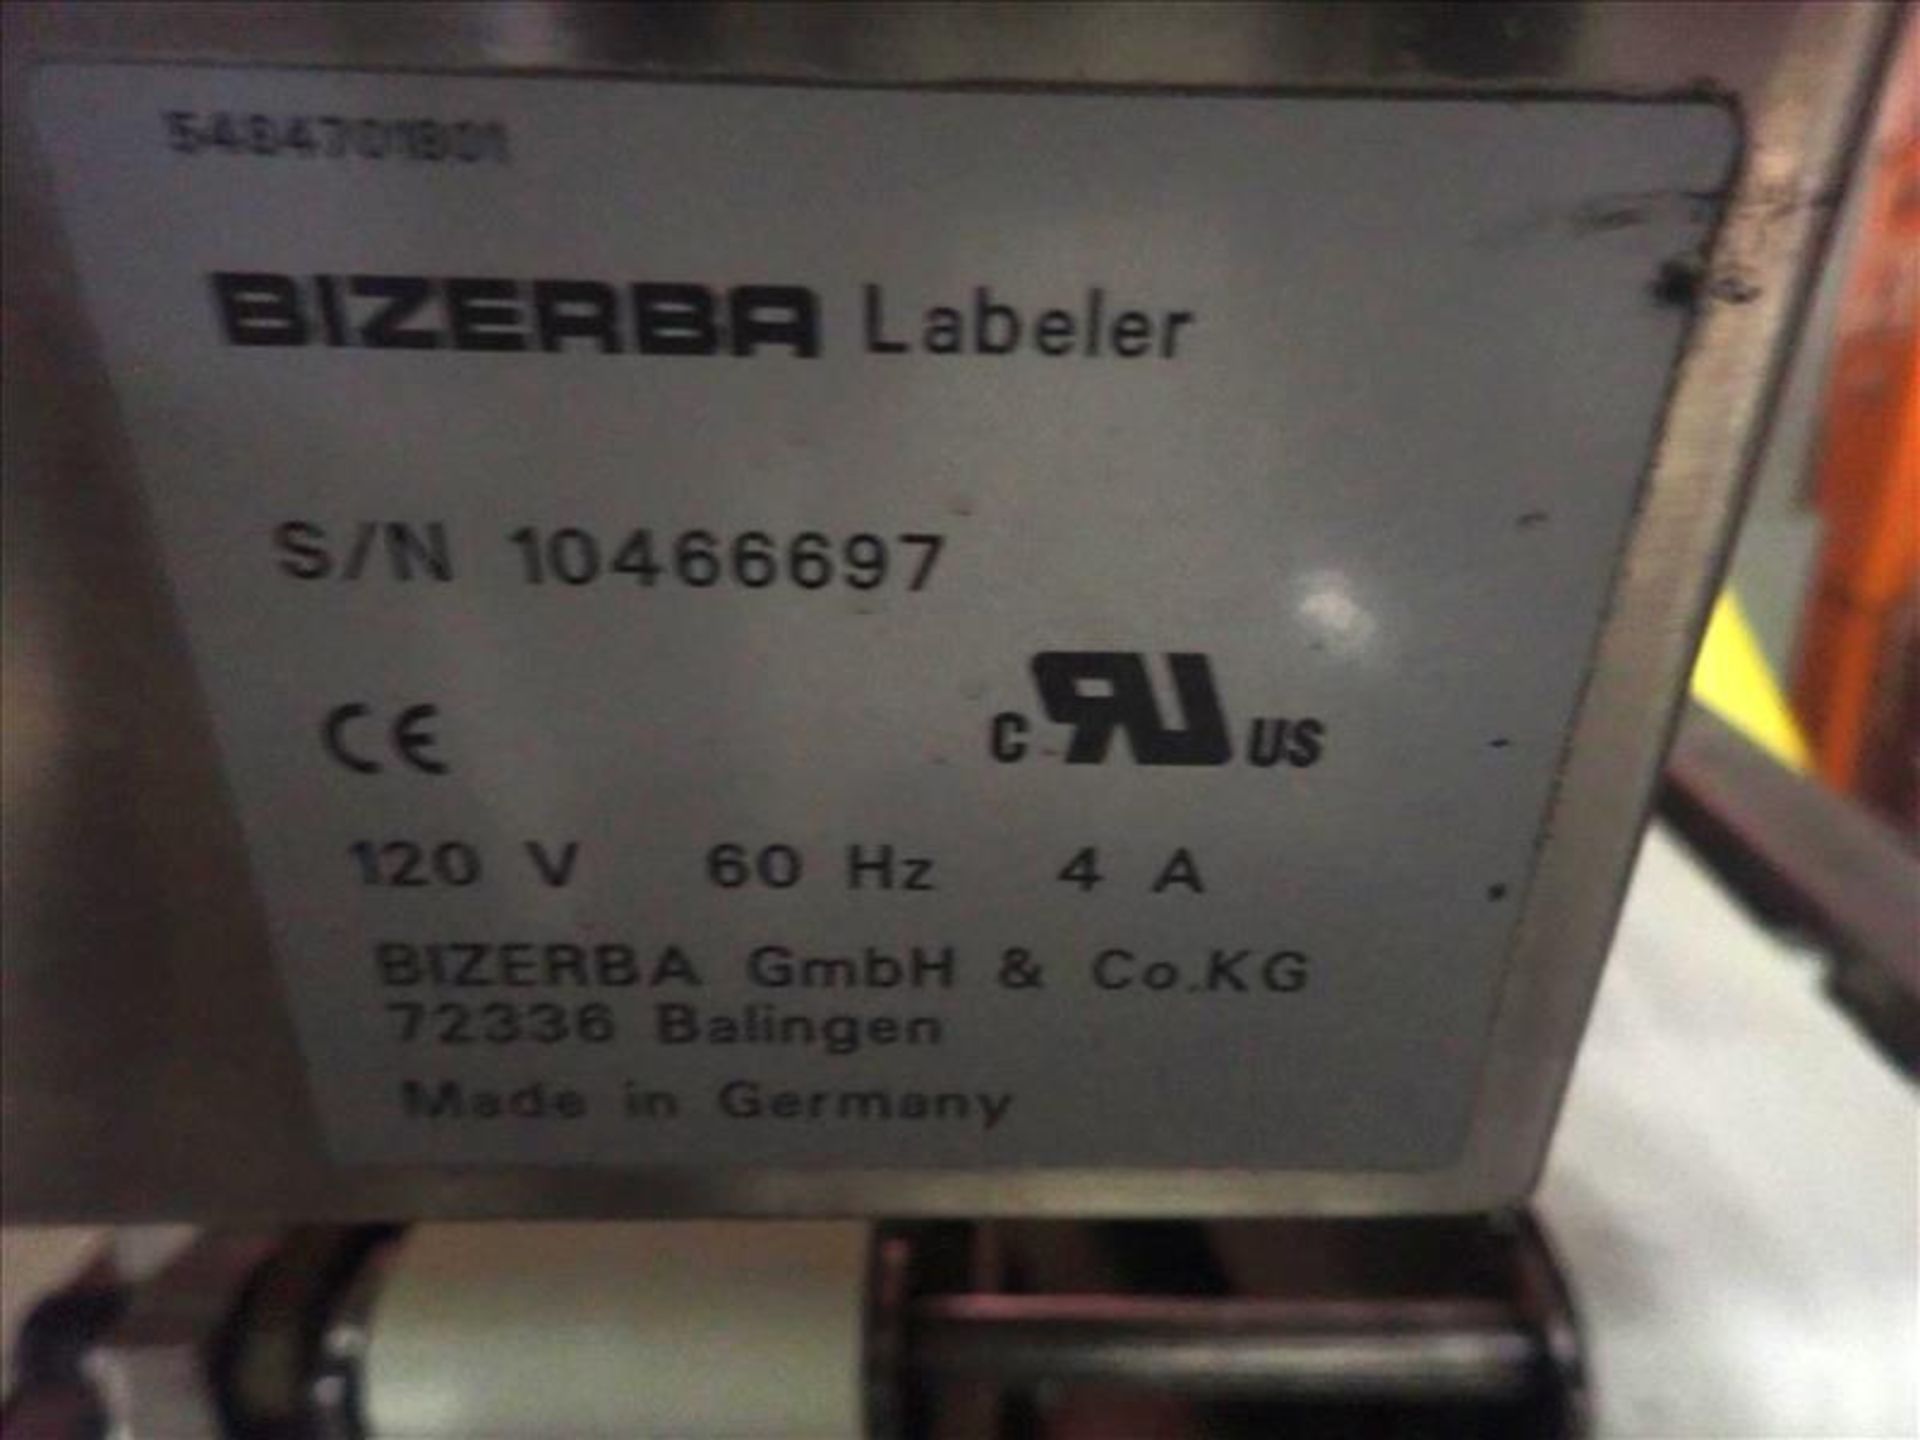 Bizerba automatic weighing labeler, mod. GLM, ser. no. 10466697, w/ (2) top/bottom label - Image 7 of 14